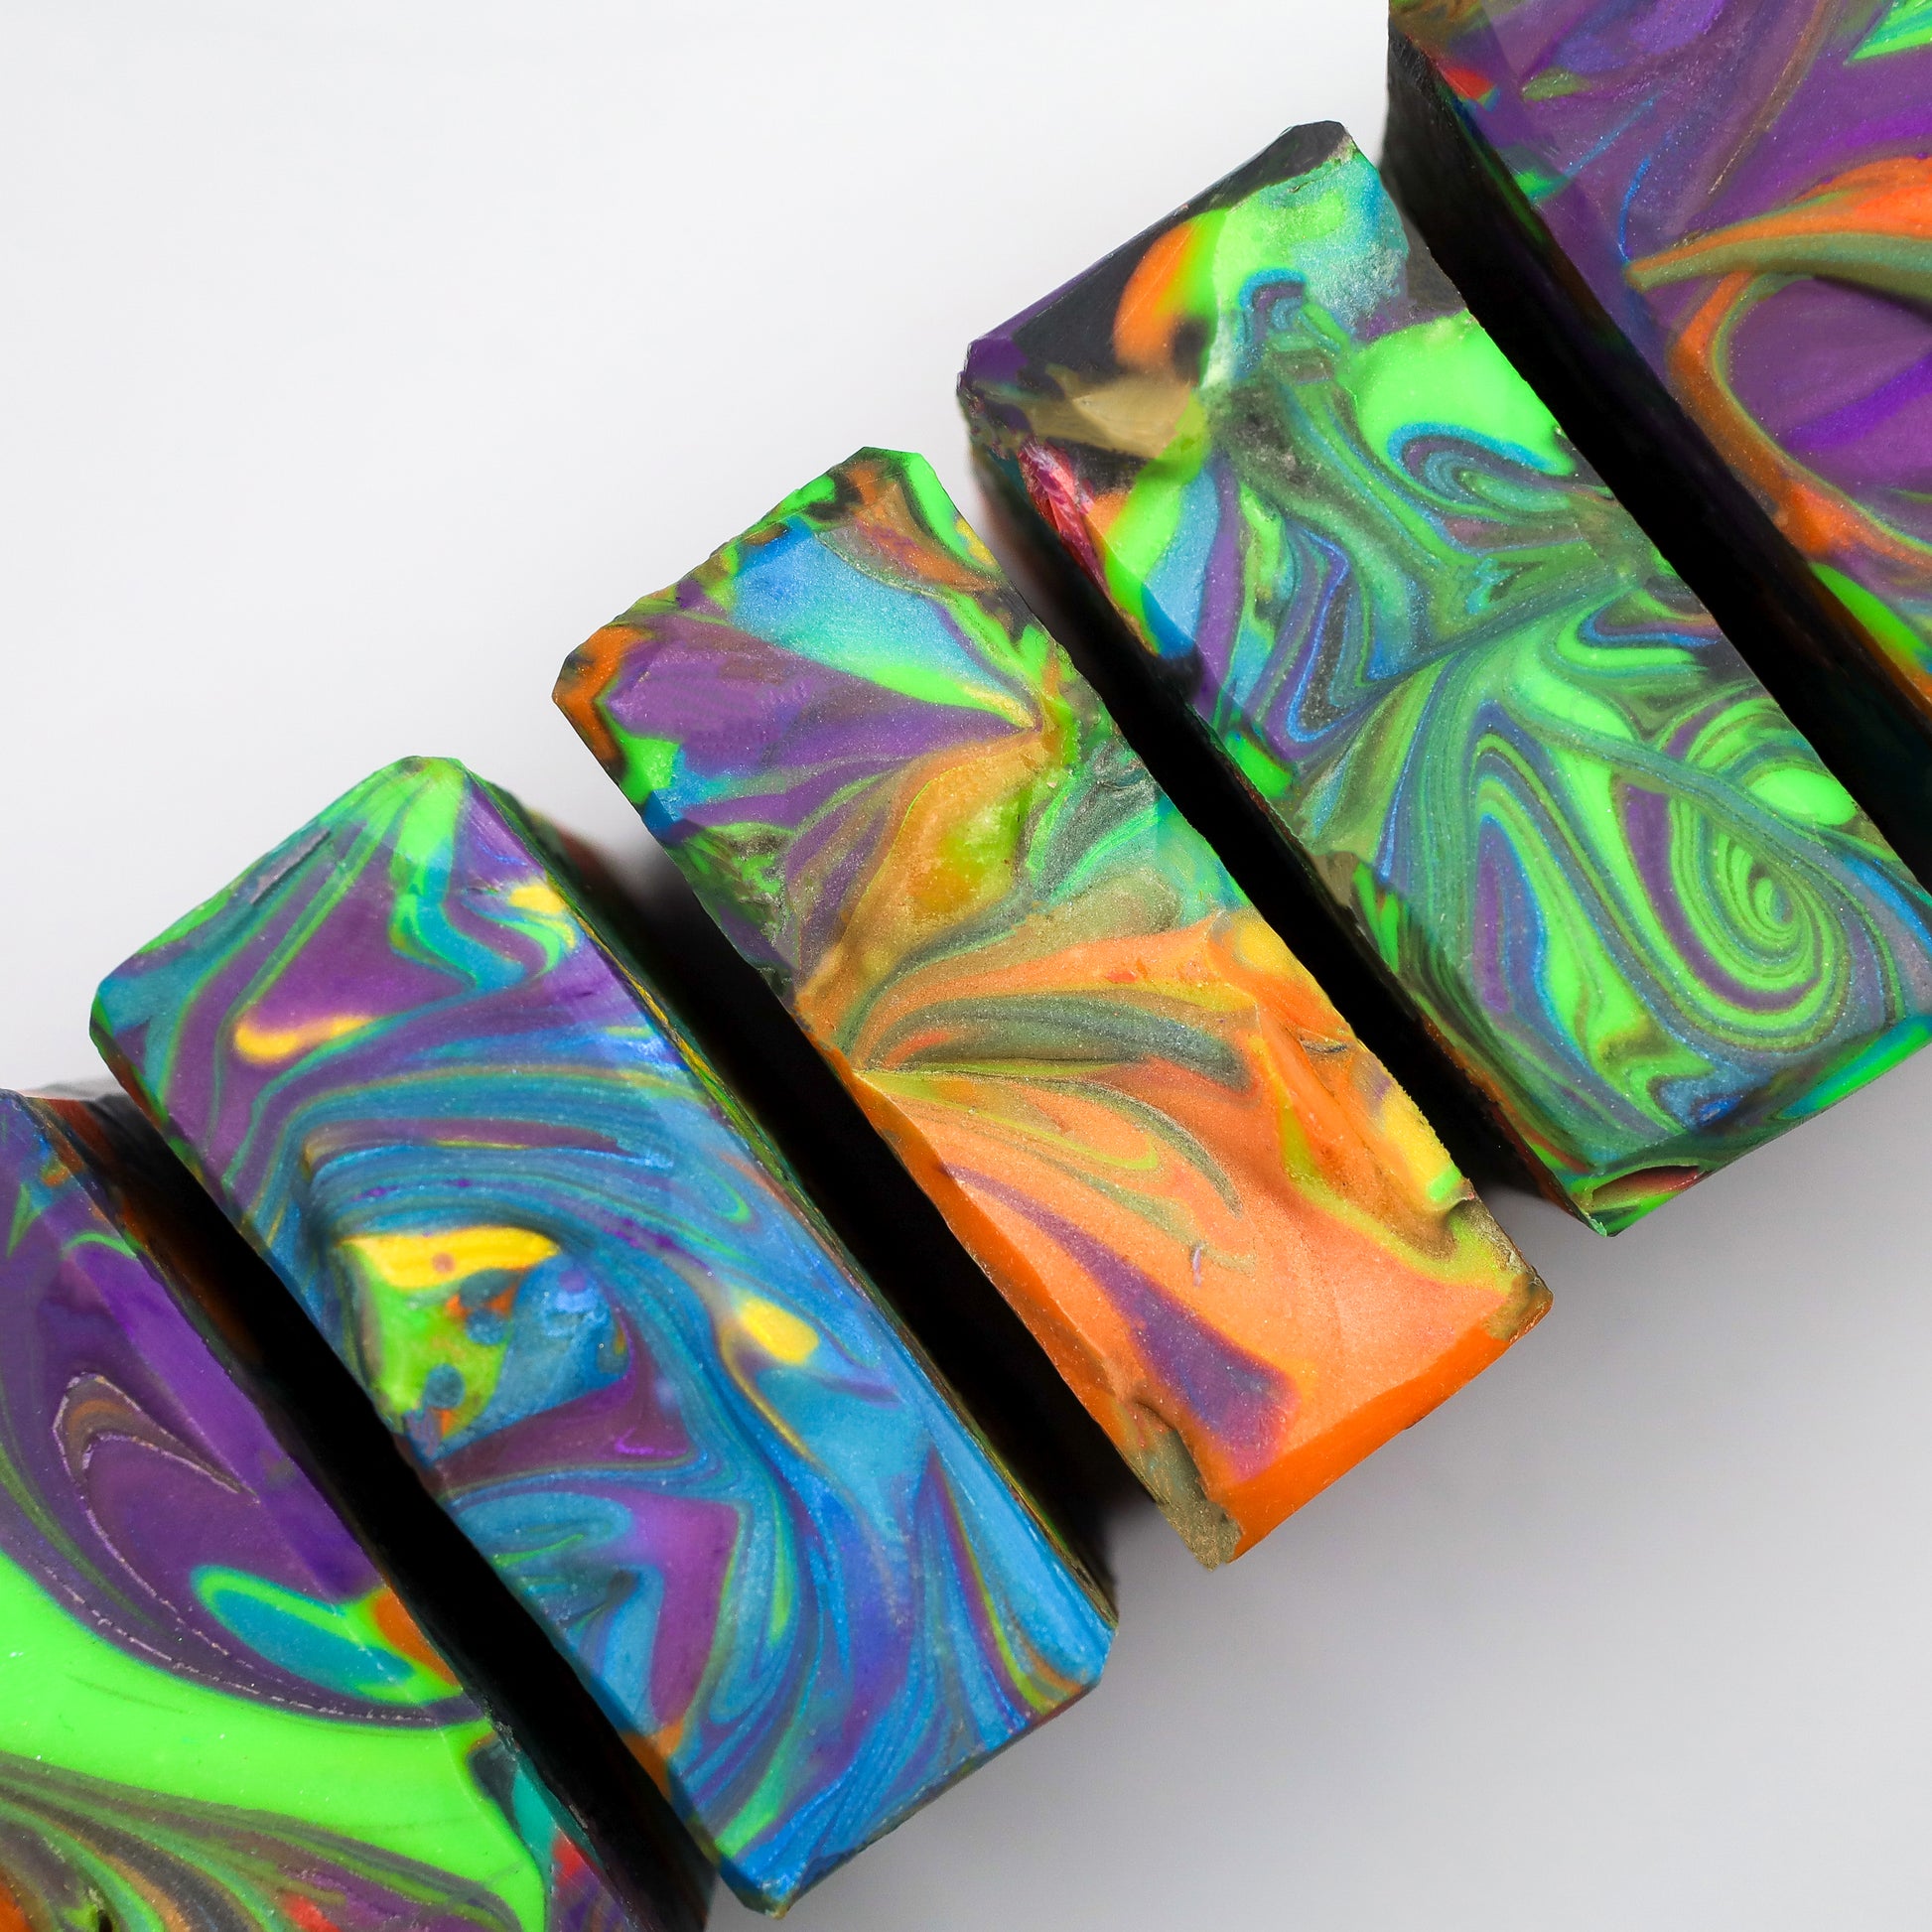 The Bifrost (formerly Aurora Borealis) - Anarchy (Vanilla, Patchouli, and Black Pepper) Soap, Birds of Valhalla, Bar Soap, Birds of Valhalla